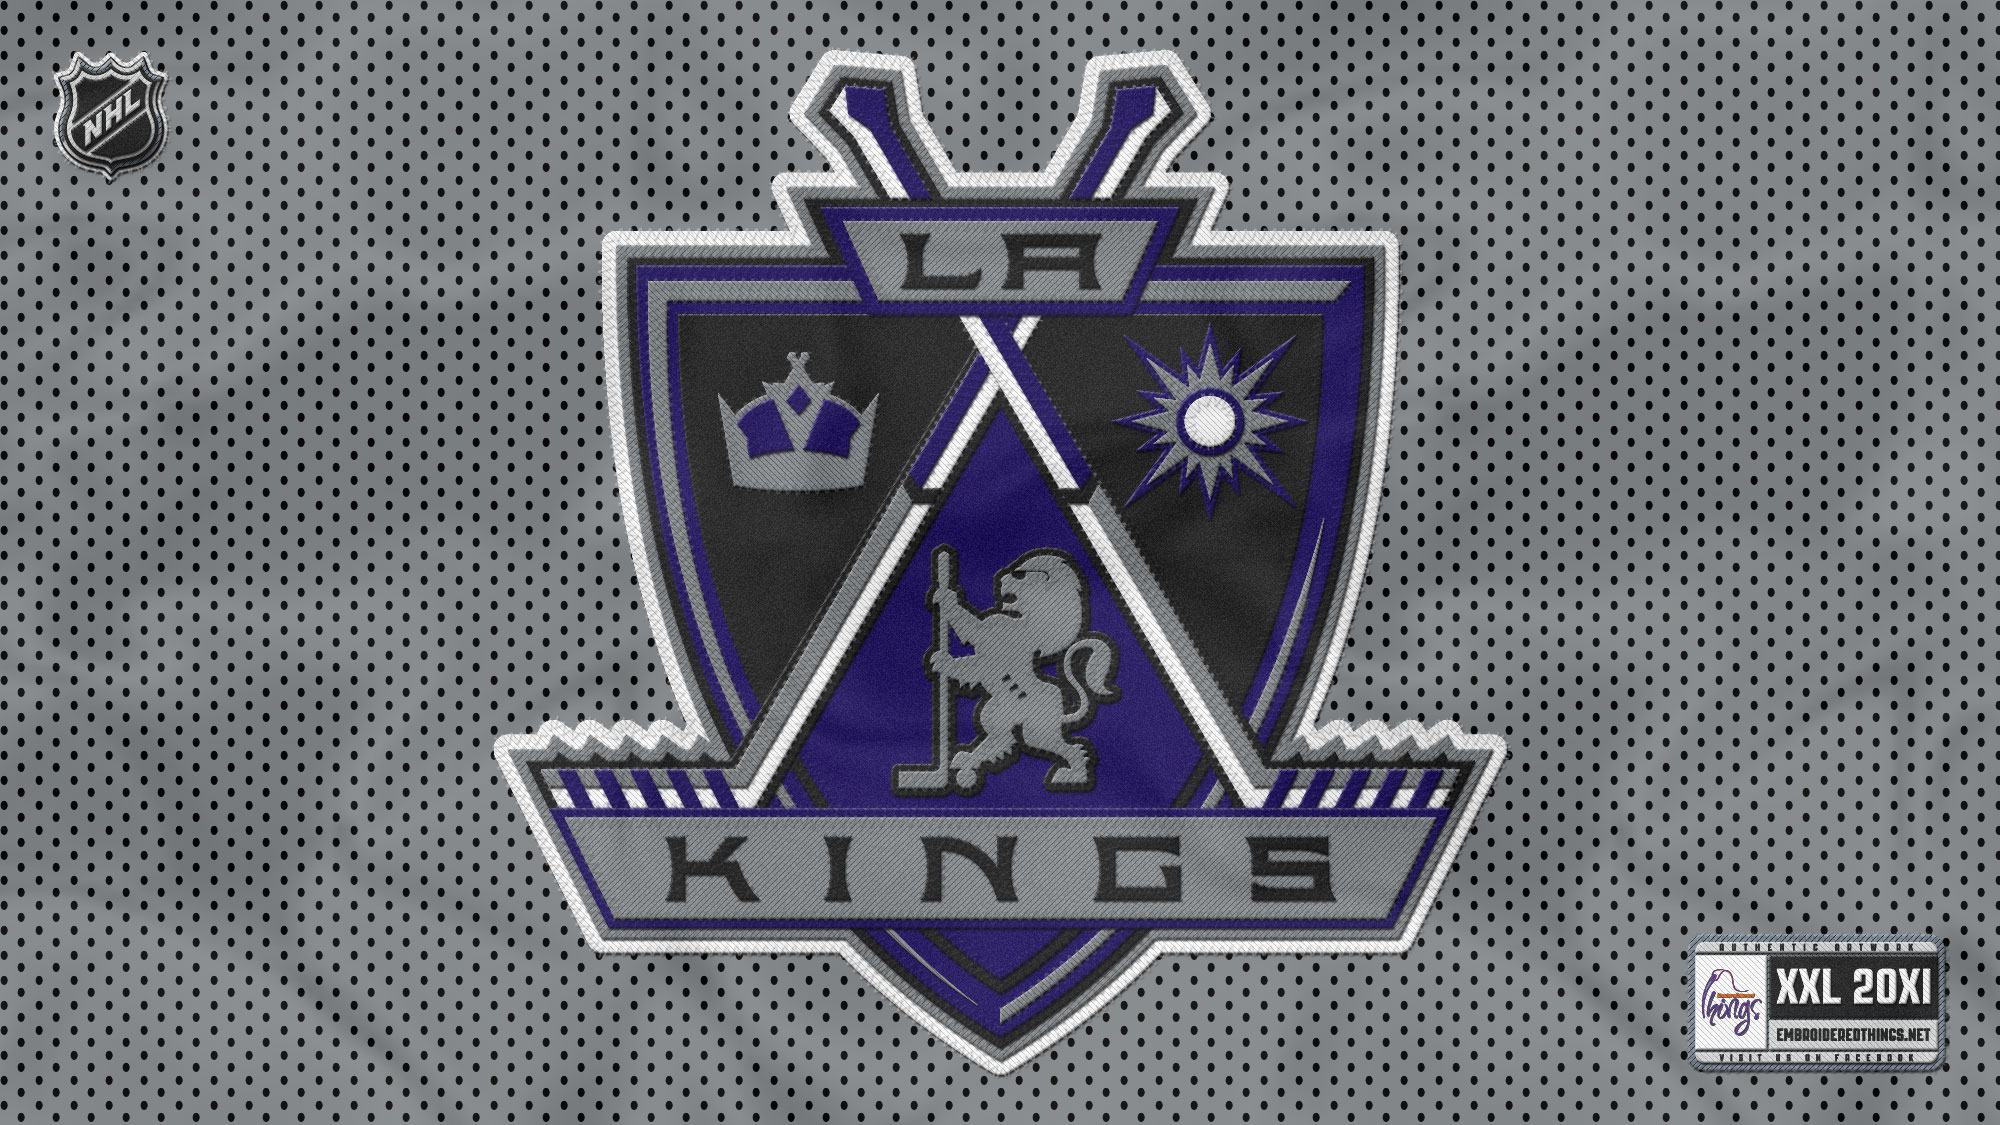 Enjoy This Los Angeles Kings Background Wallpaper